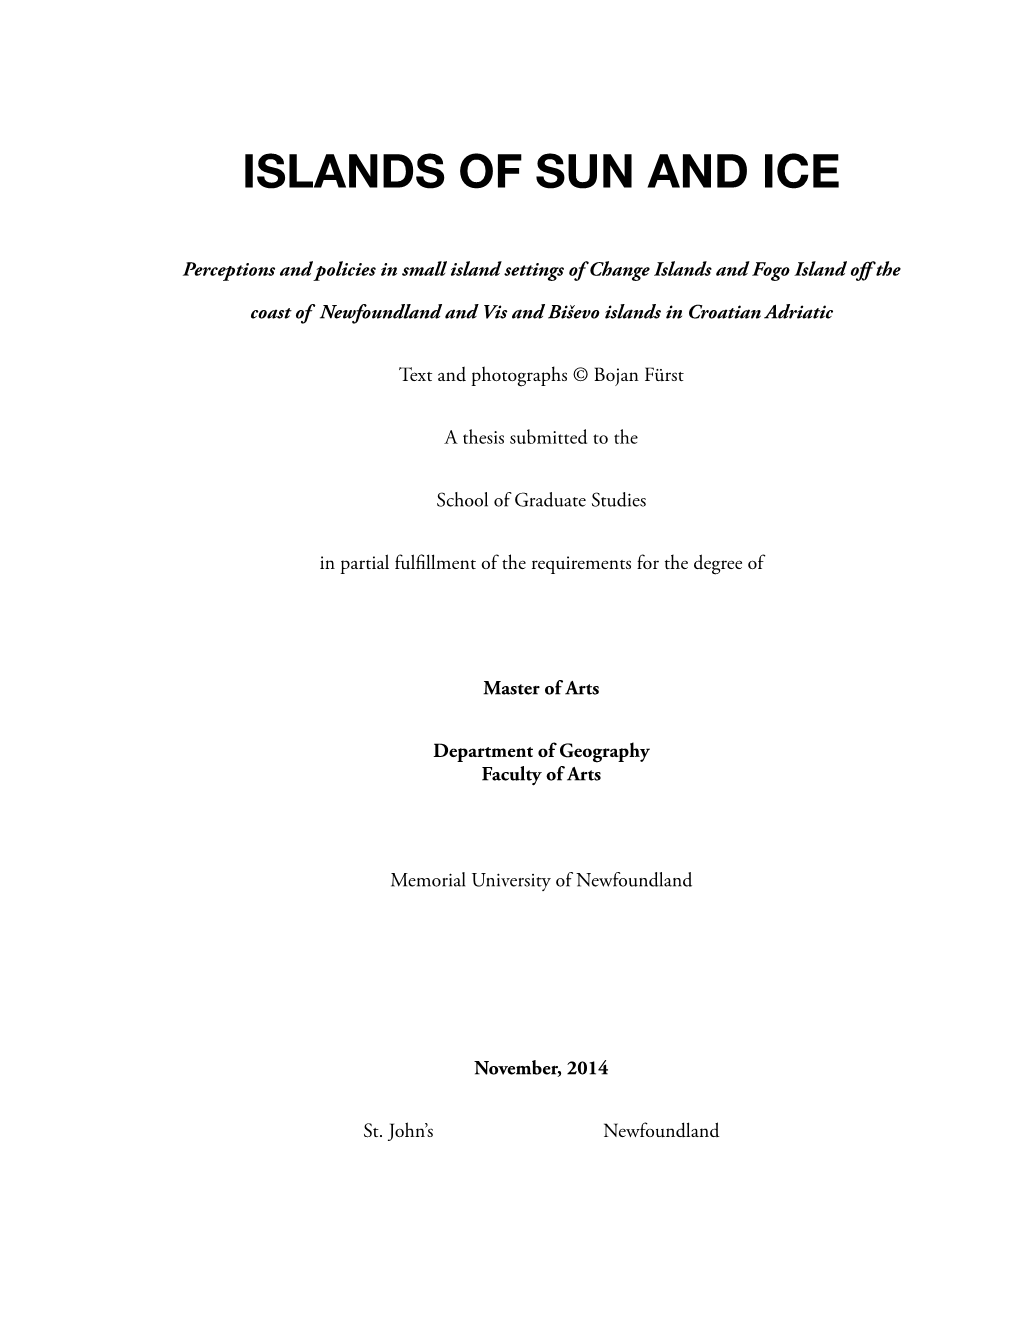 Islands of Sun and Ice